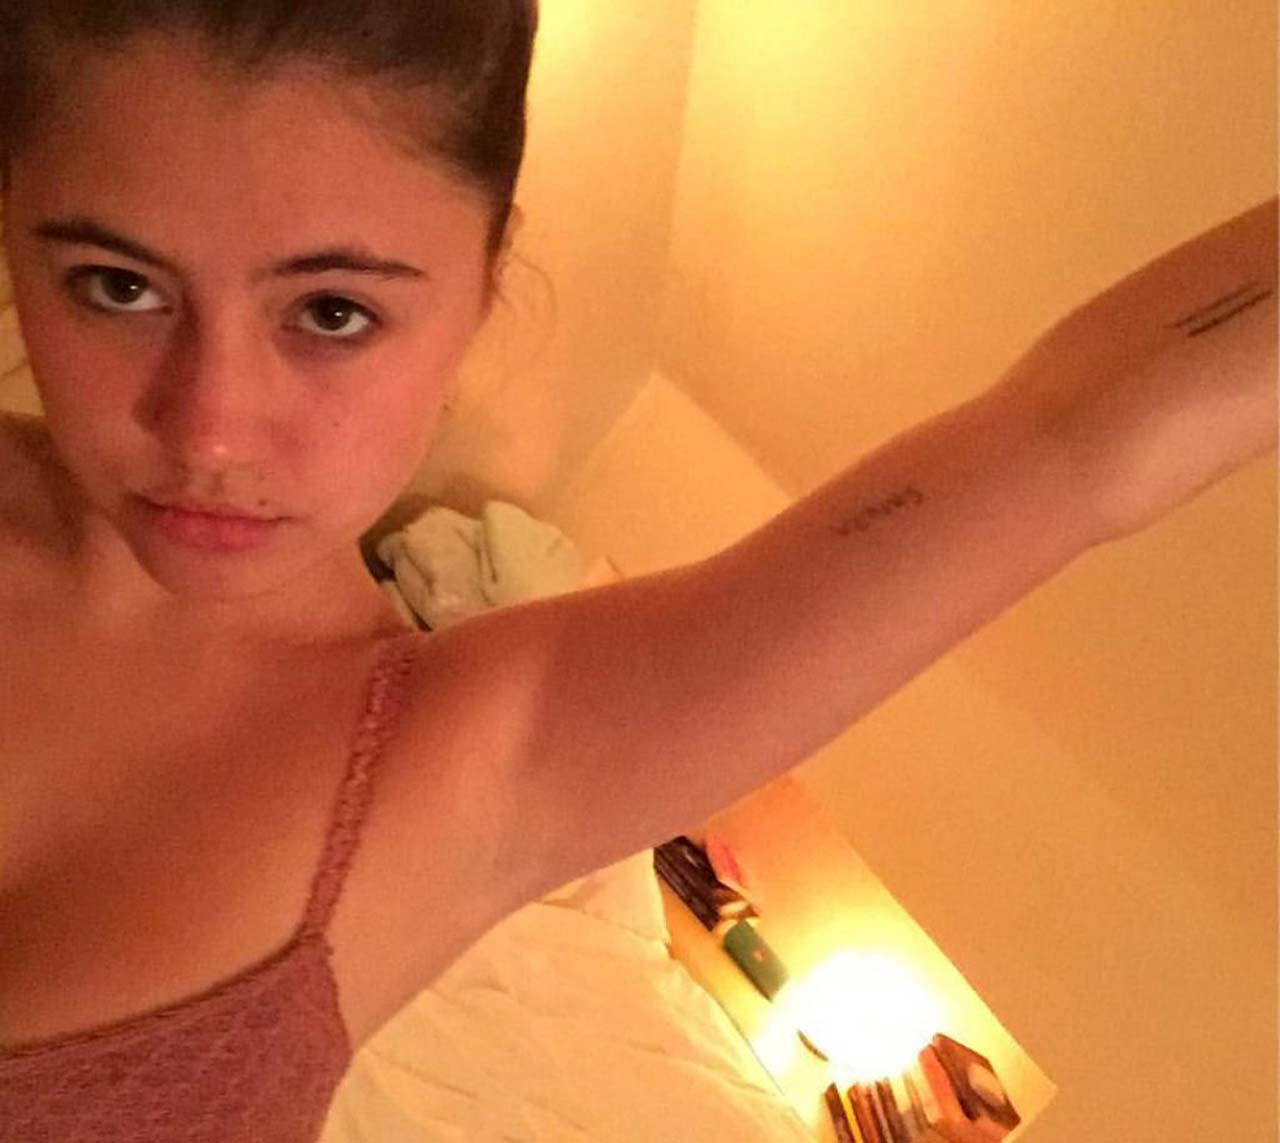 Lia Marie Johnson Nude And Topless Private Pics — Young Star Showed Natural Perky Tits Scandal